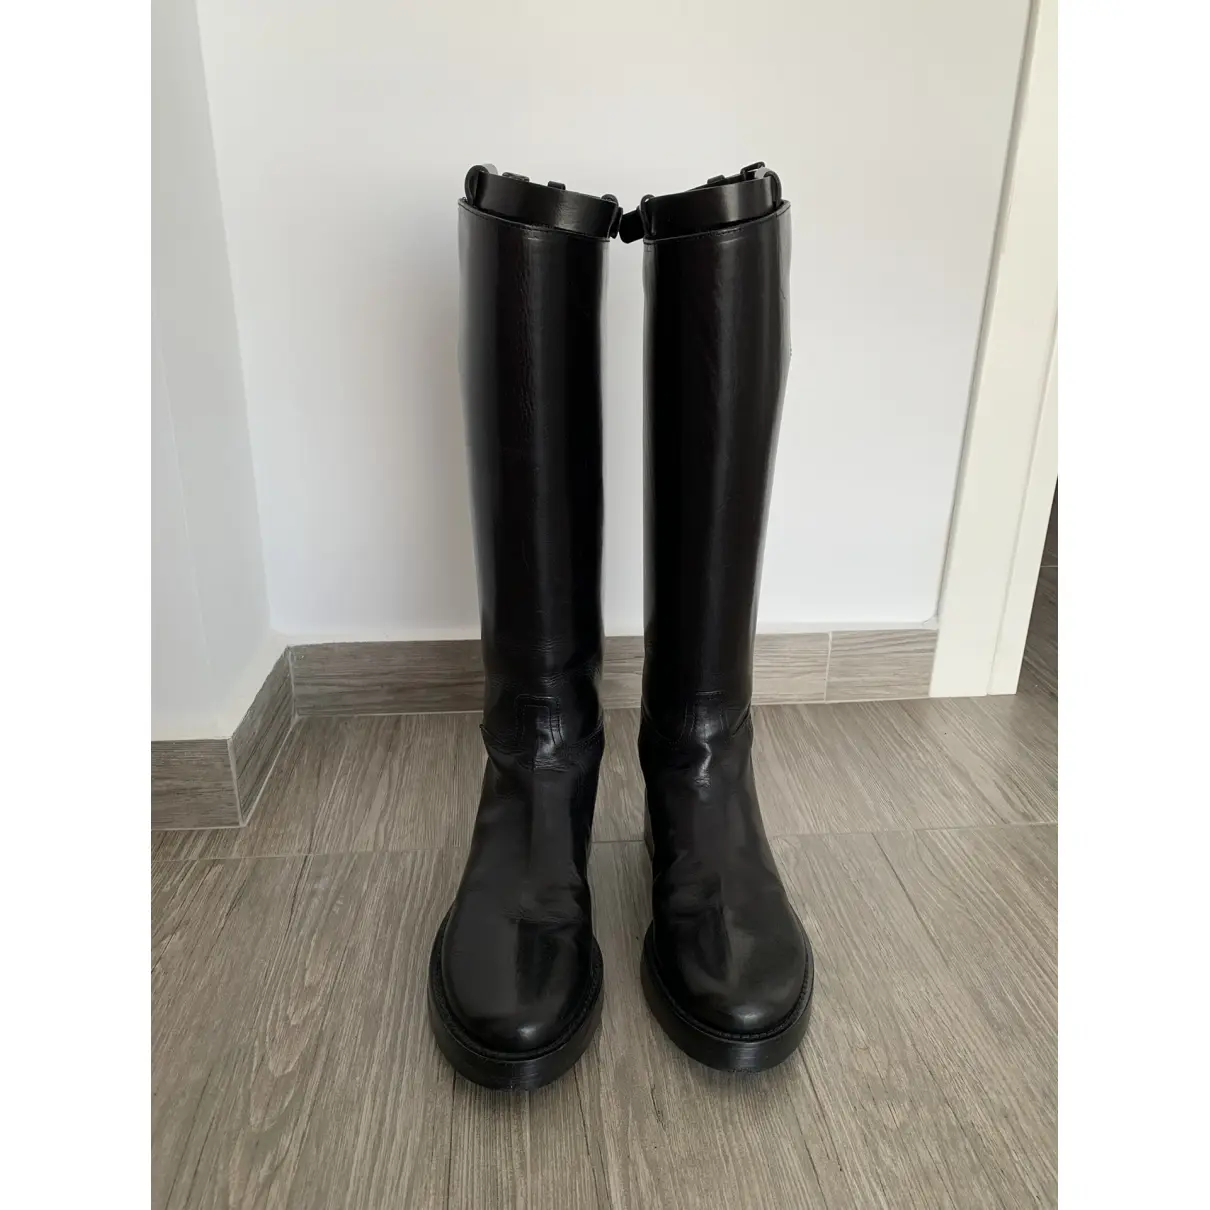 Buy Ann Demeulemeester Leather riding boots online